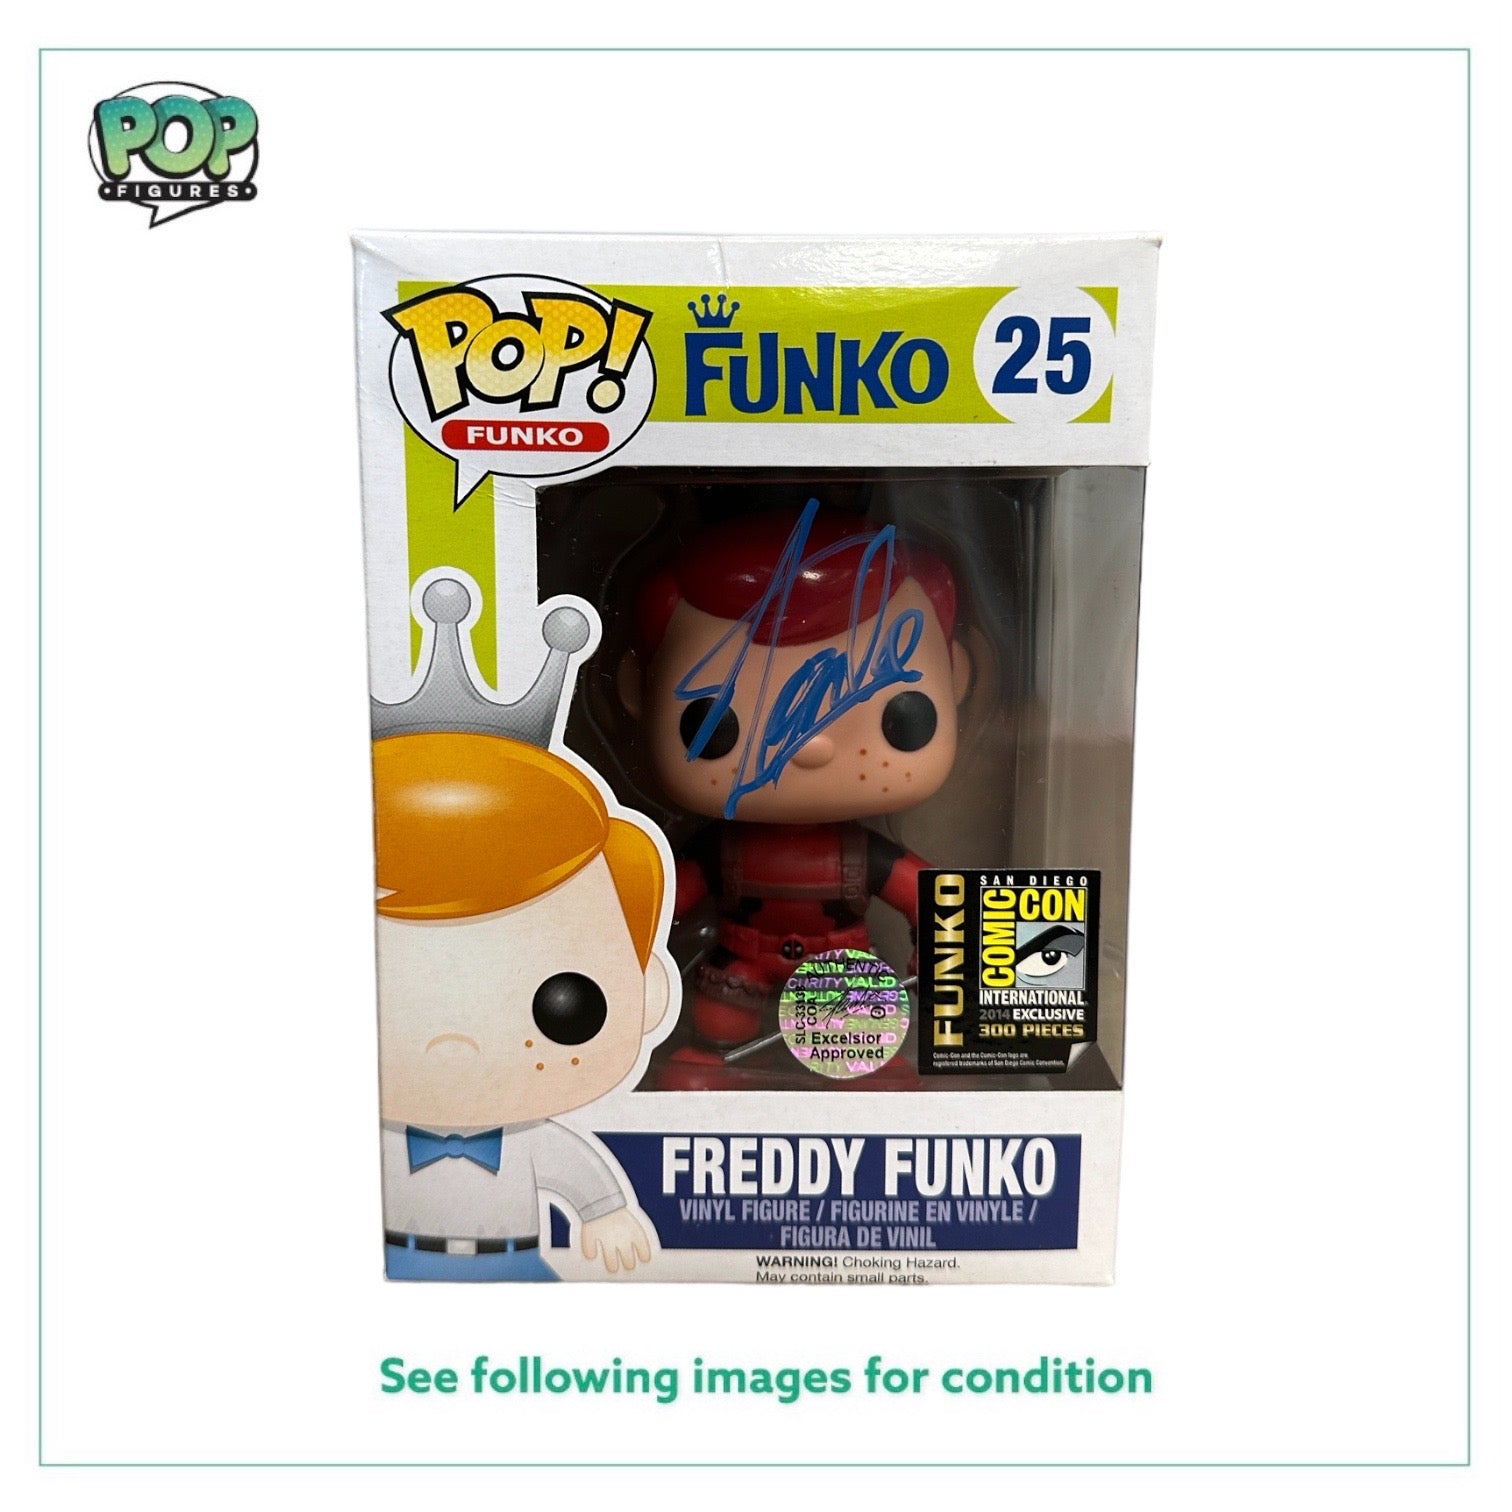 Stan Lee Signed Freddy Funko as Deadpool #25 Funko Pop! - SDCC 2014 Exclusive LE300 Pcs - Condition 7.5/10 - Excelsior Approved COA